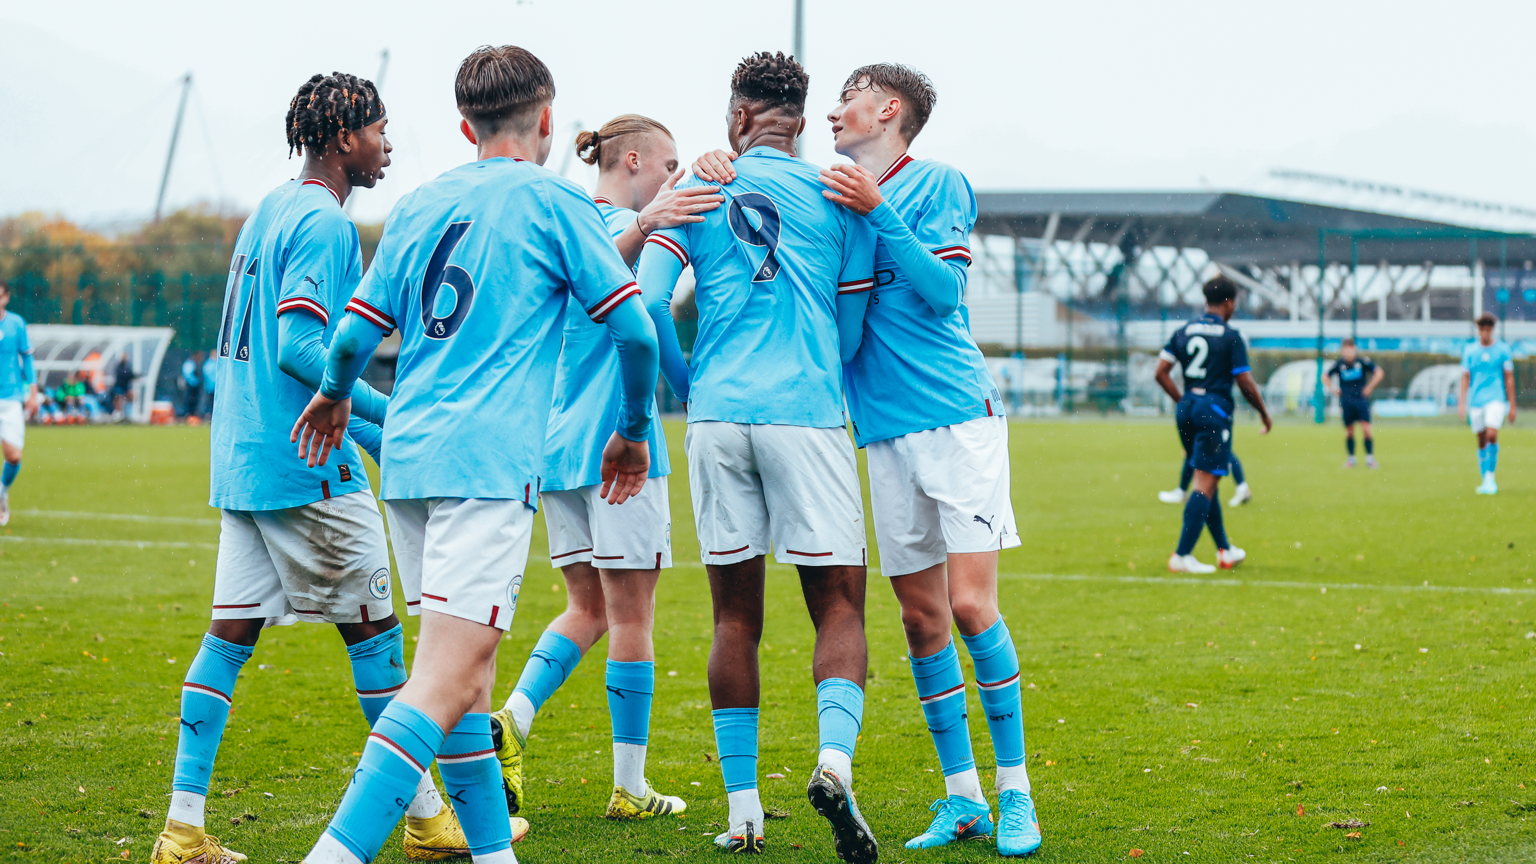 Oboavwoduo double sees City go seven points clear at the top of the Under-18s Premier League.